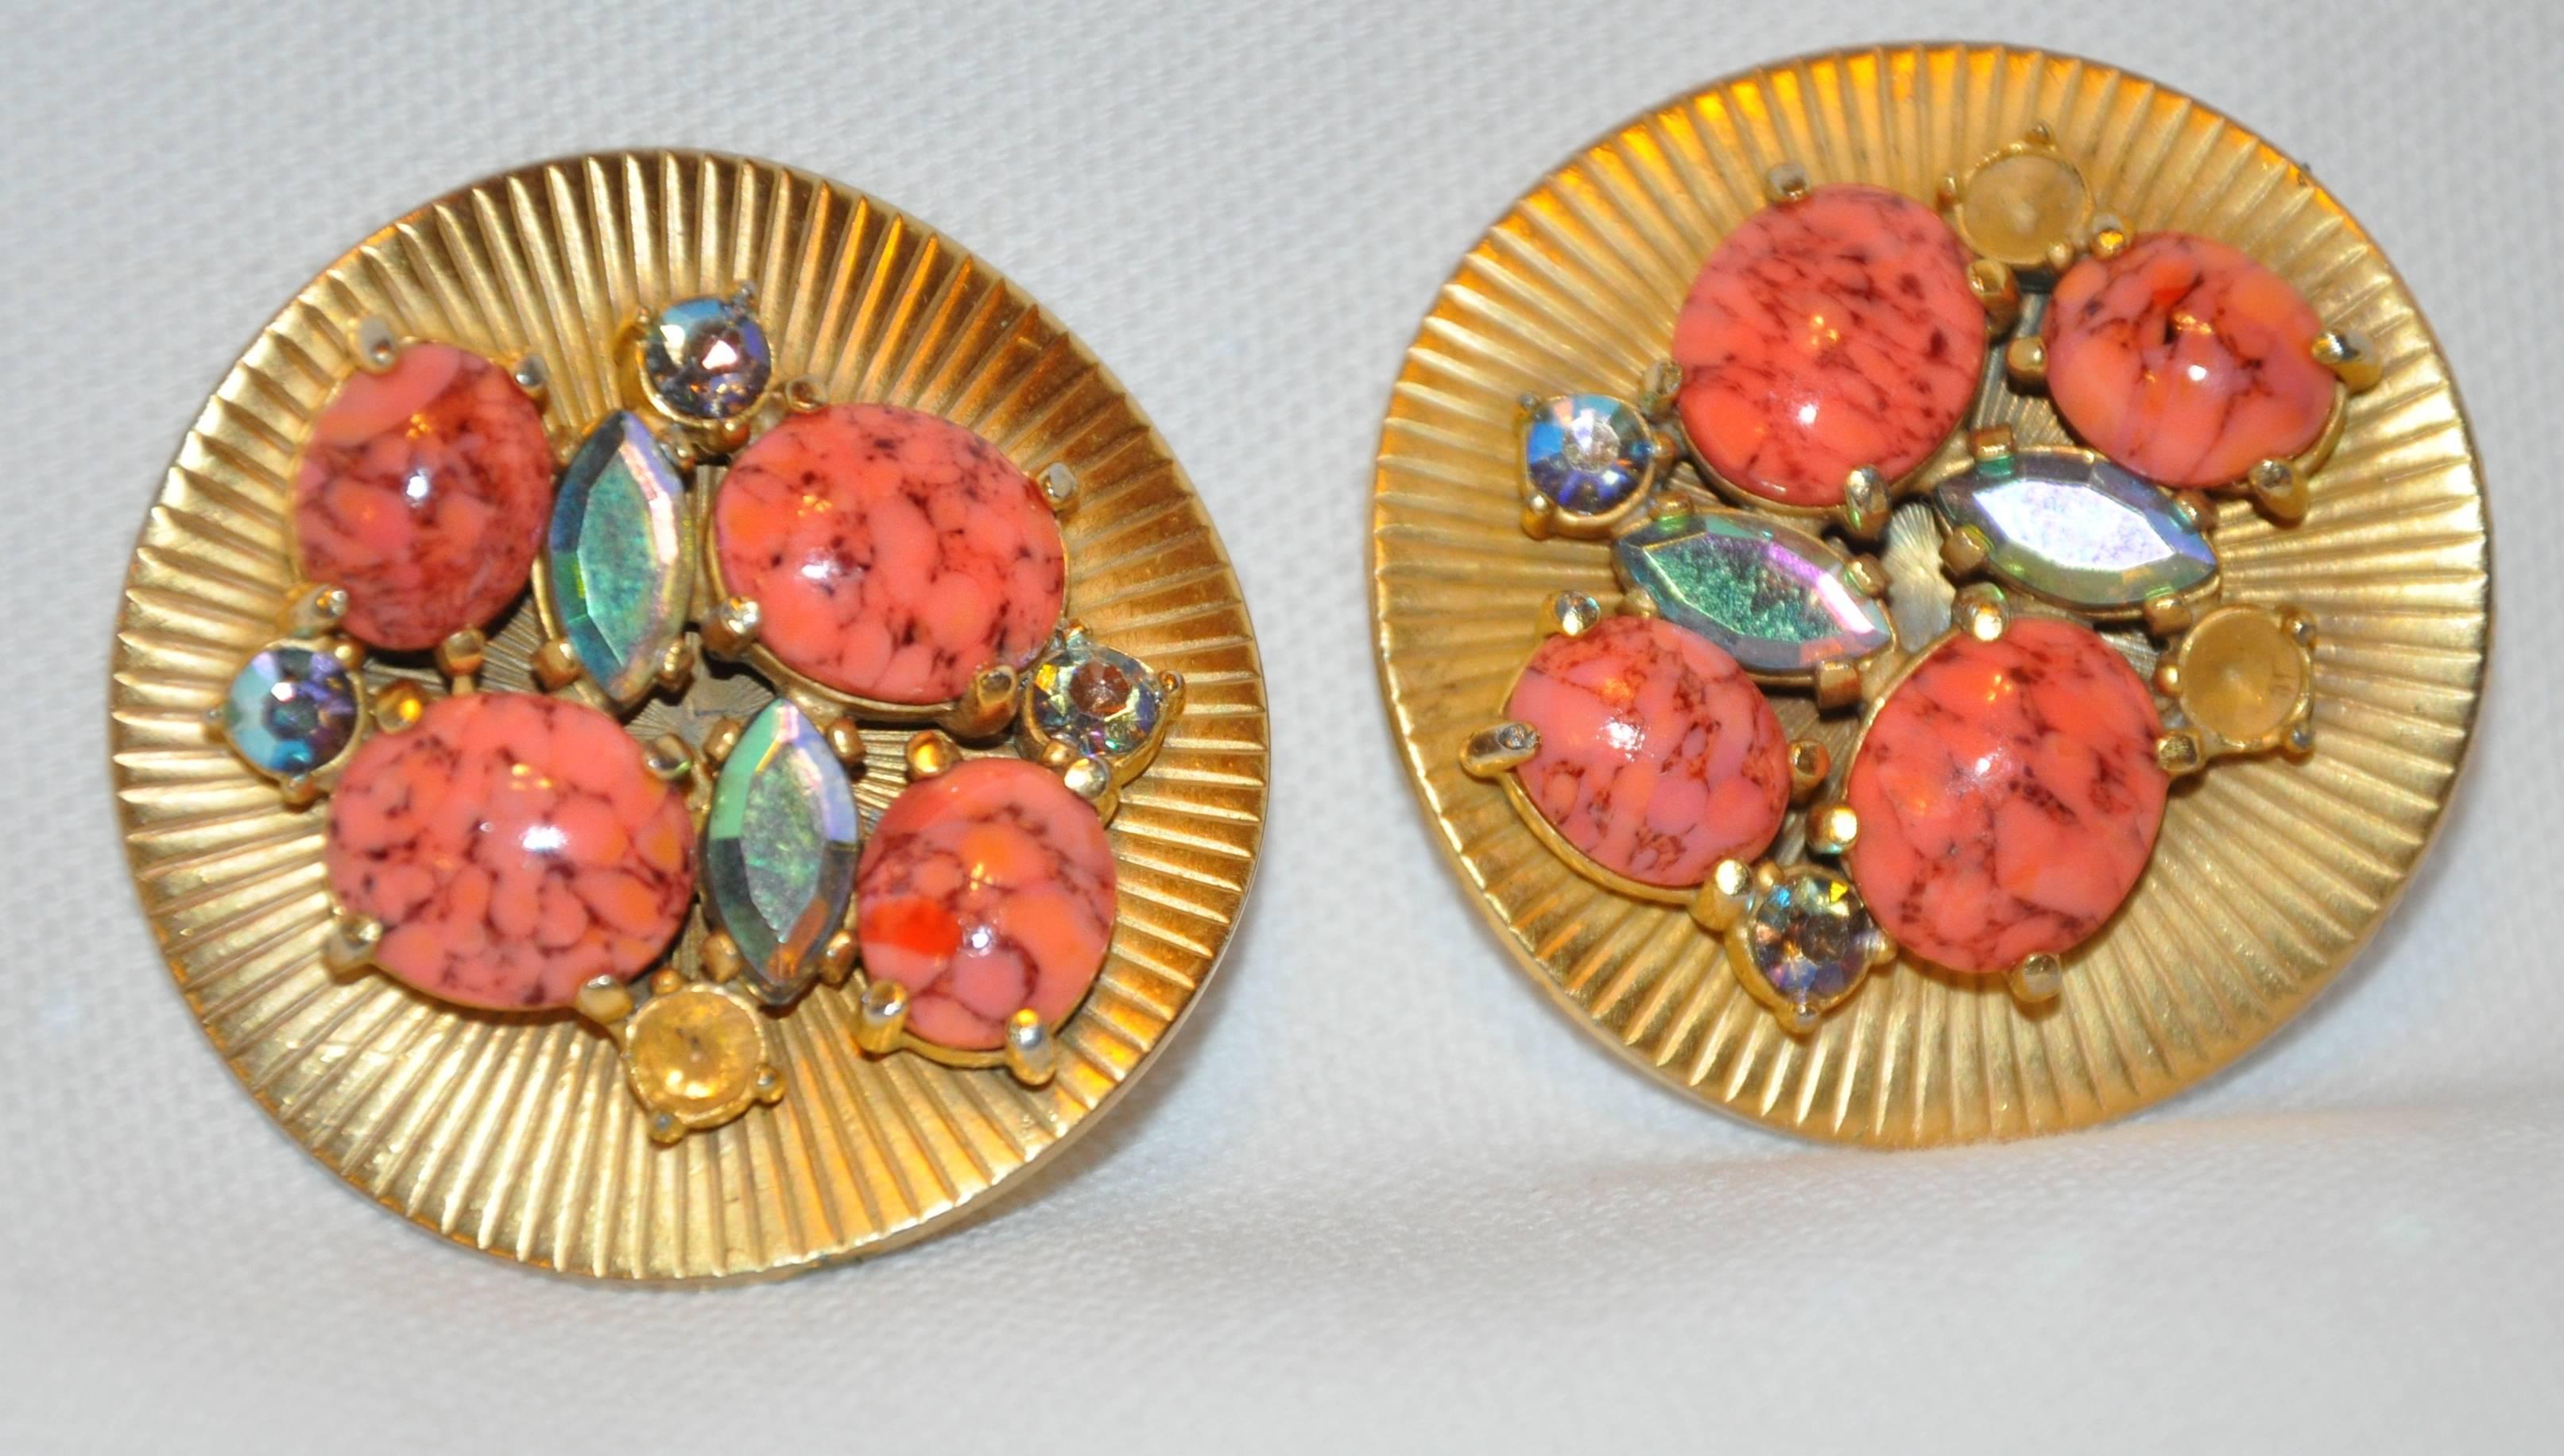        Schiaparelli Wonderful whimsical large textured gilded gold hardware as well as gilded polished gold hardware is accented with multi-colors of faux corals and faux gemstones, both in shapes of round and ovals. The clip-on earrings are missing